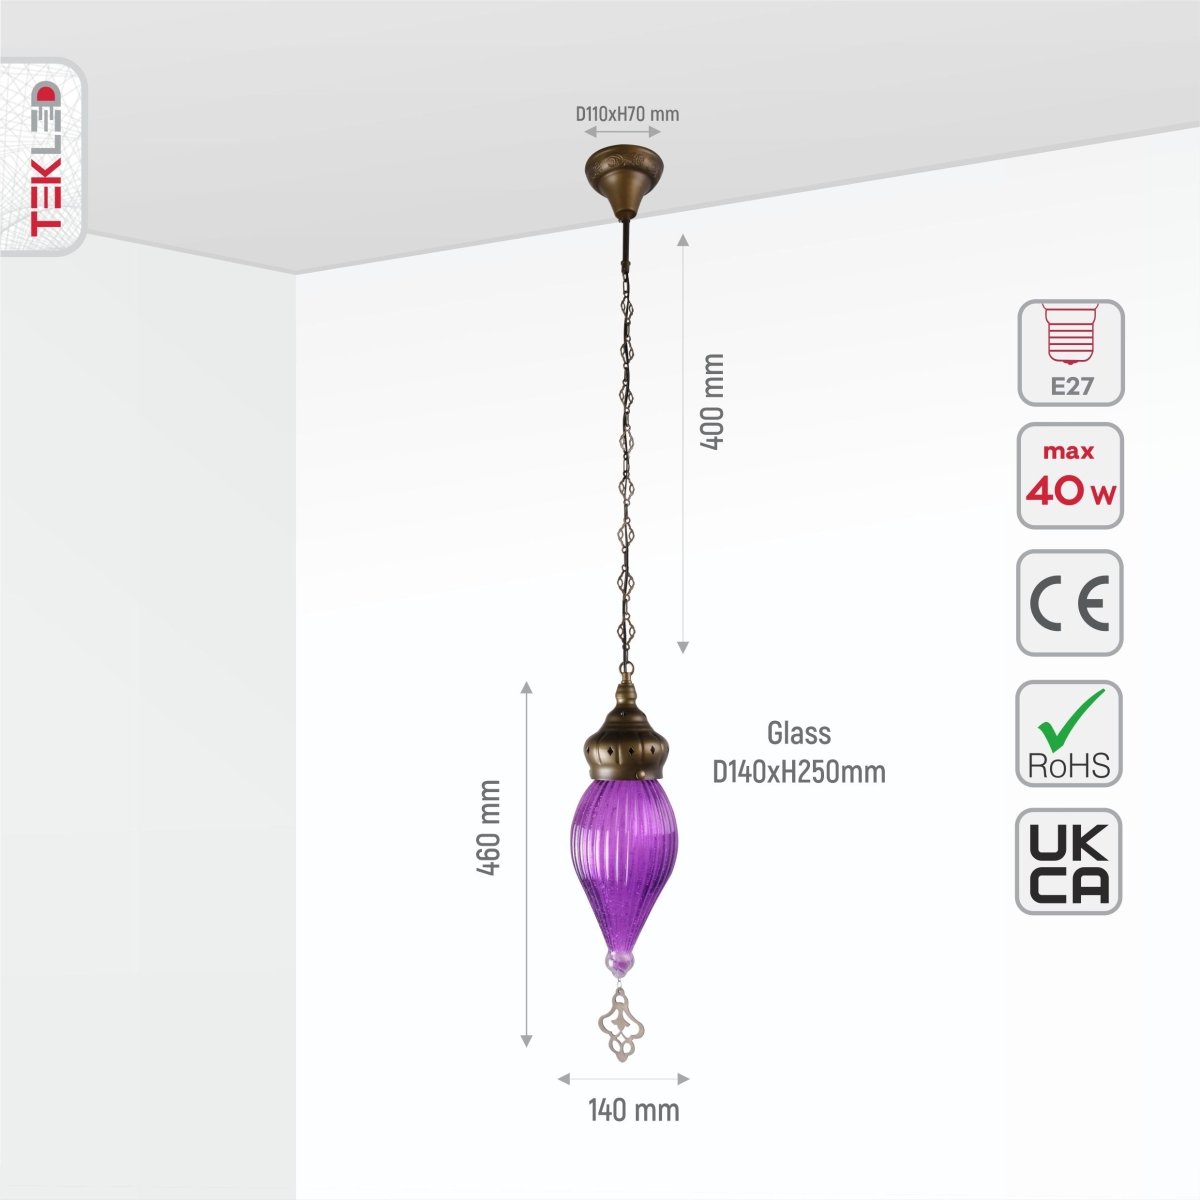 Size and specs of Moroccan Style Antique Brass and Purple Glass Oriental Ceiling Pendant Light E27 | TEKLED 158-195583